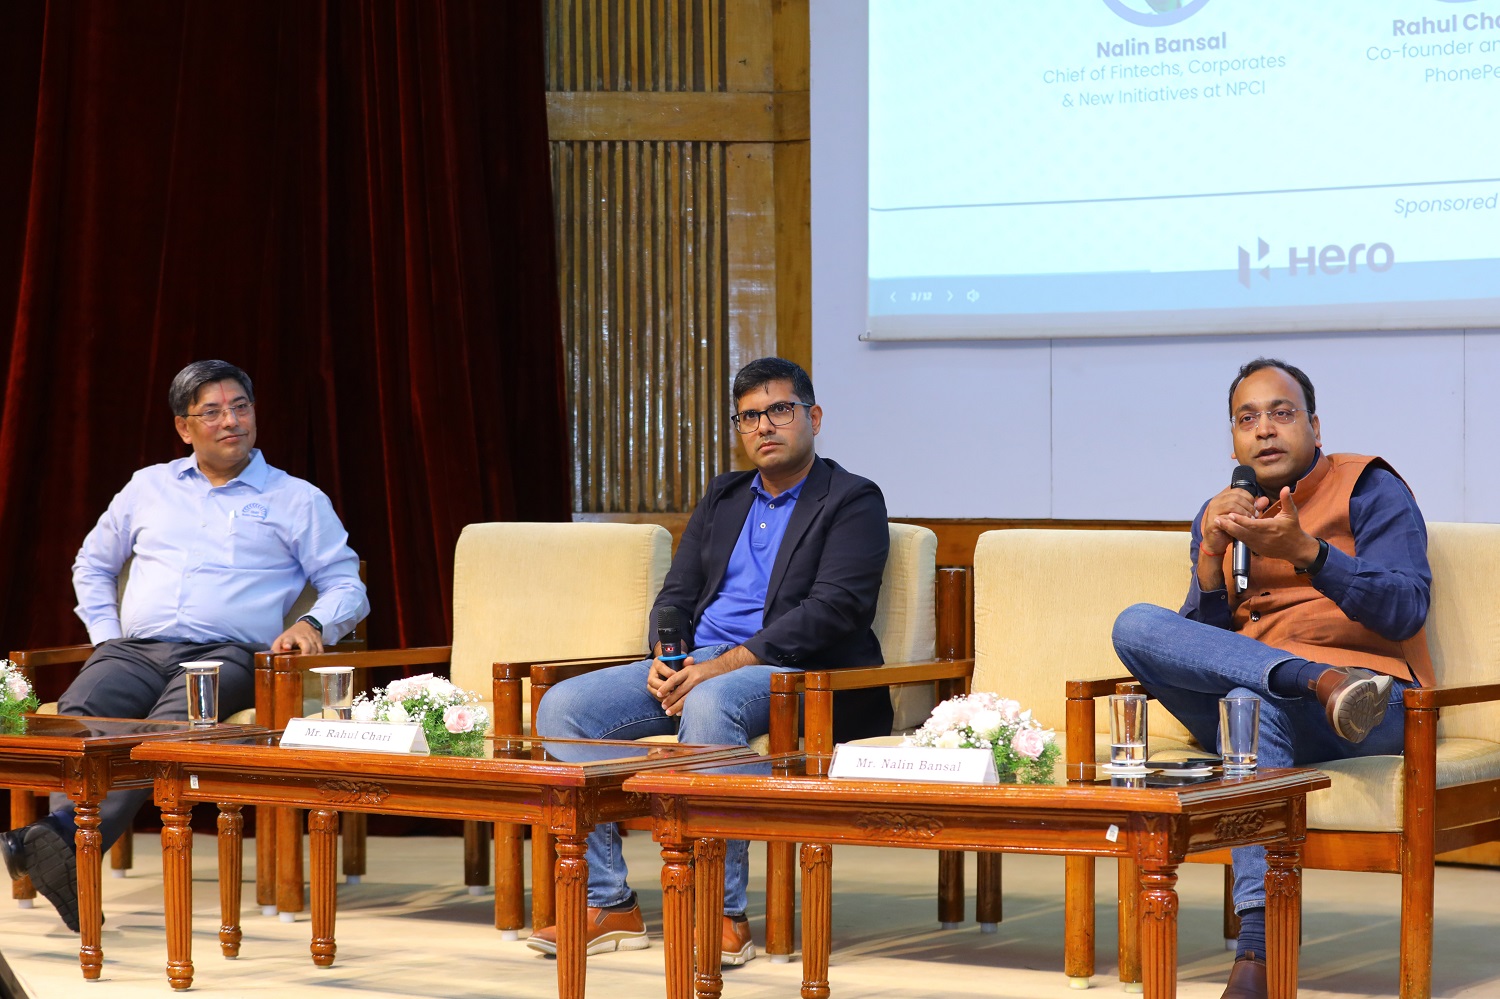 Prof. R Srinivasan, Faculty from the Strategy area, IIMB, moderated the panel discussion on "Unveiling UPI 2.0: Embracing Interoperability and Global Outreach". (L-R) Prof. R Srinivasan; Rahul Chari, Co-founder and CTO, PhonePe and Nalin Bansaln, Chief of Fintechs, Corporates and New Initiatives at NPCI.